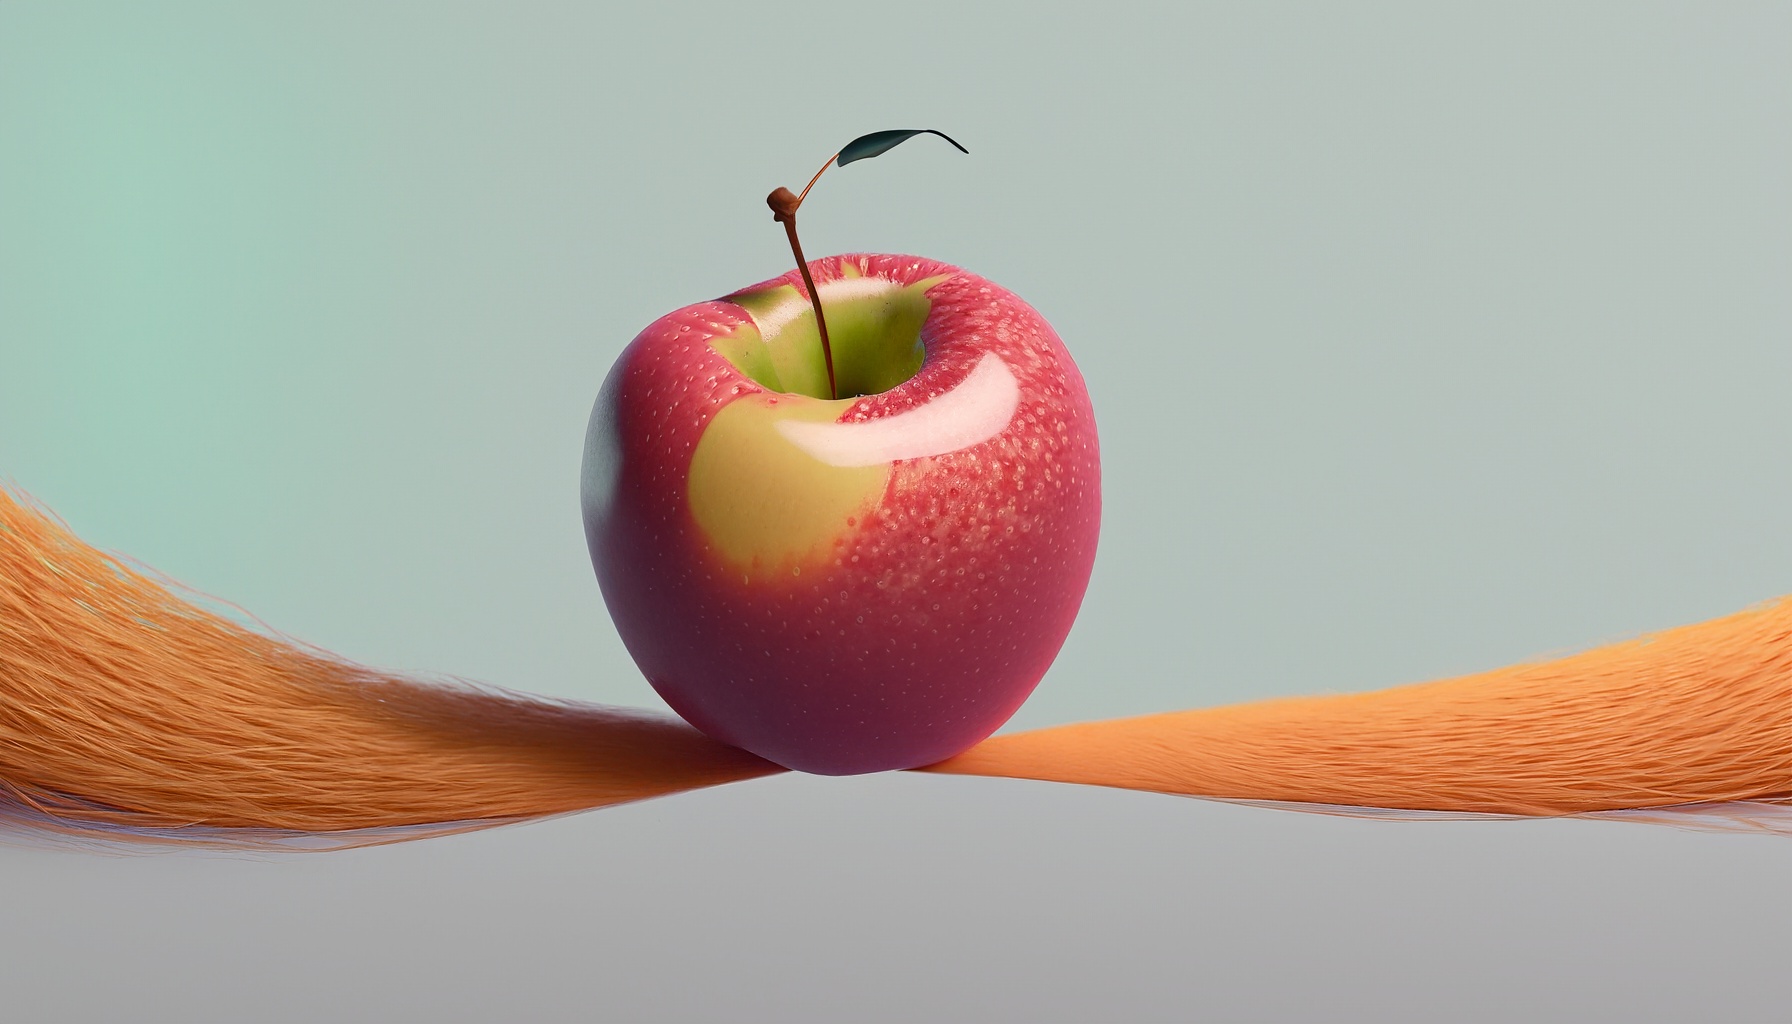 A single strand of human hair can support the weight of an apple